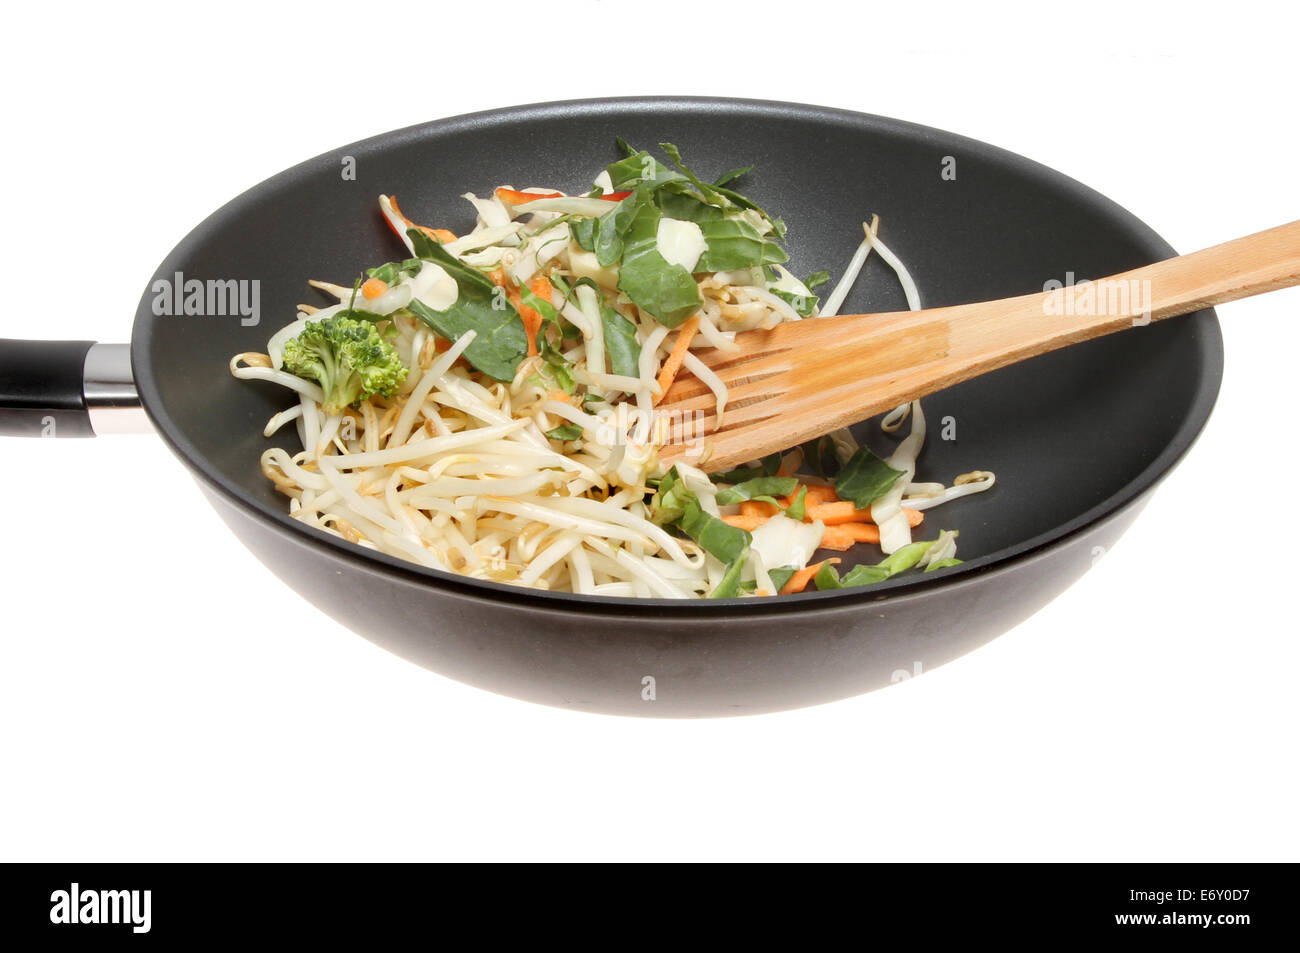 Closeup of a wok with stir fry vegetables, bean sprouts and a wooden spatula isolated against white Stock Photo